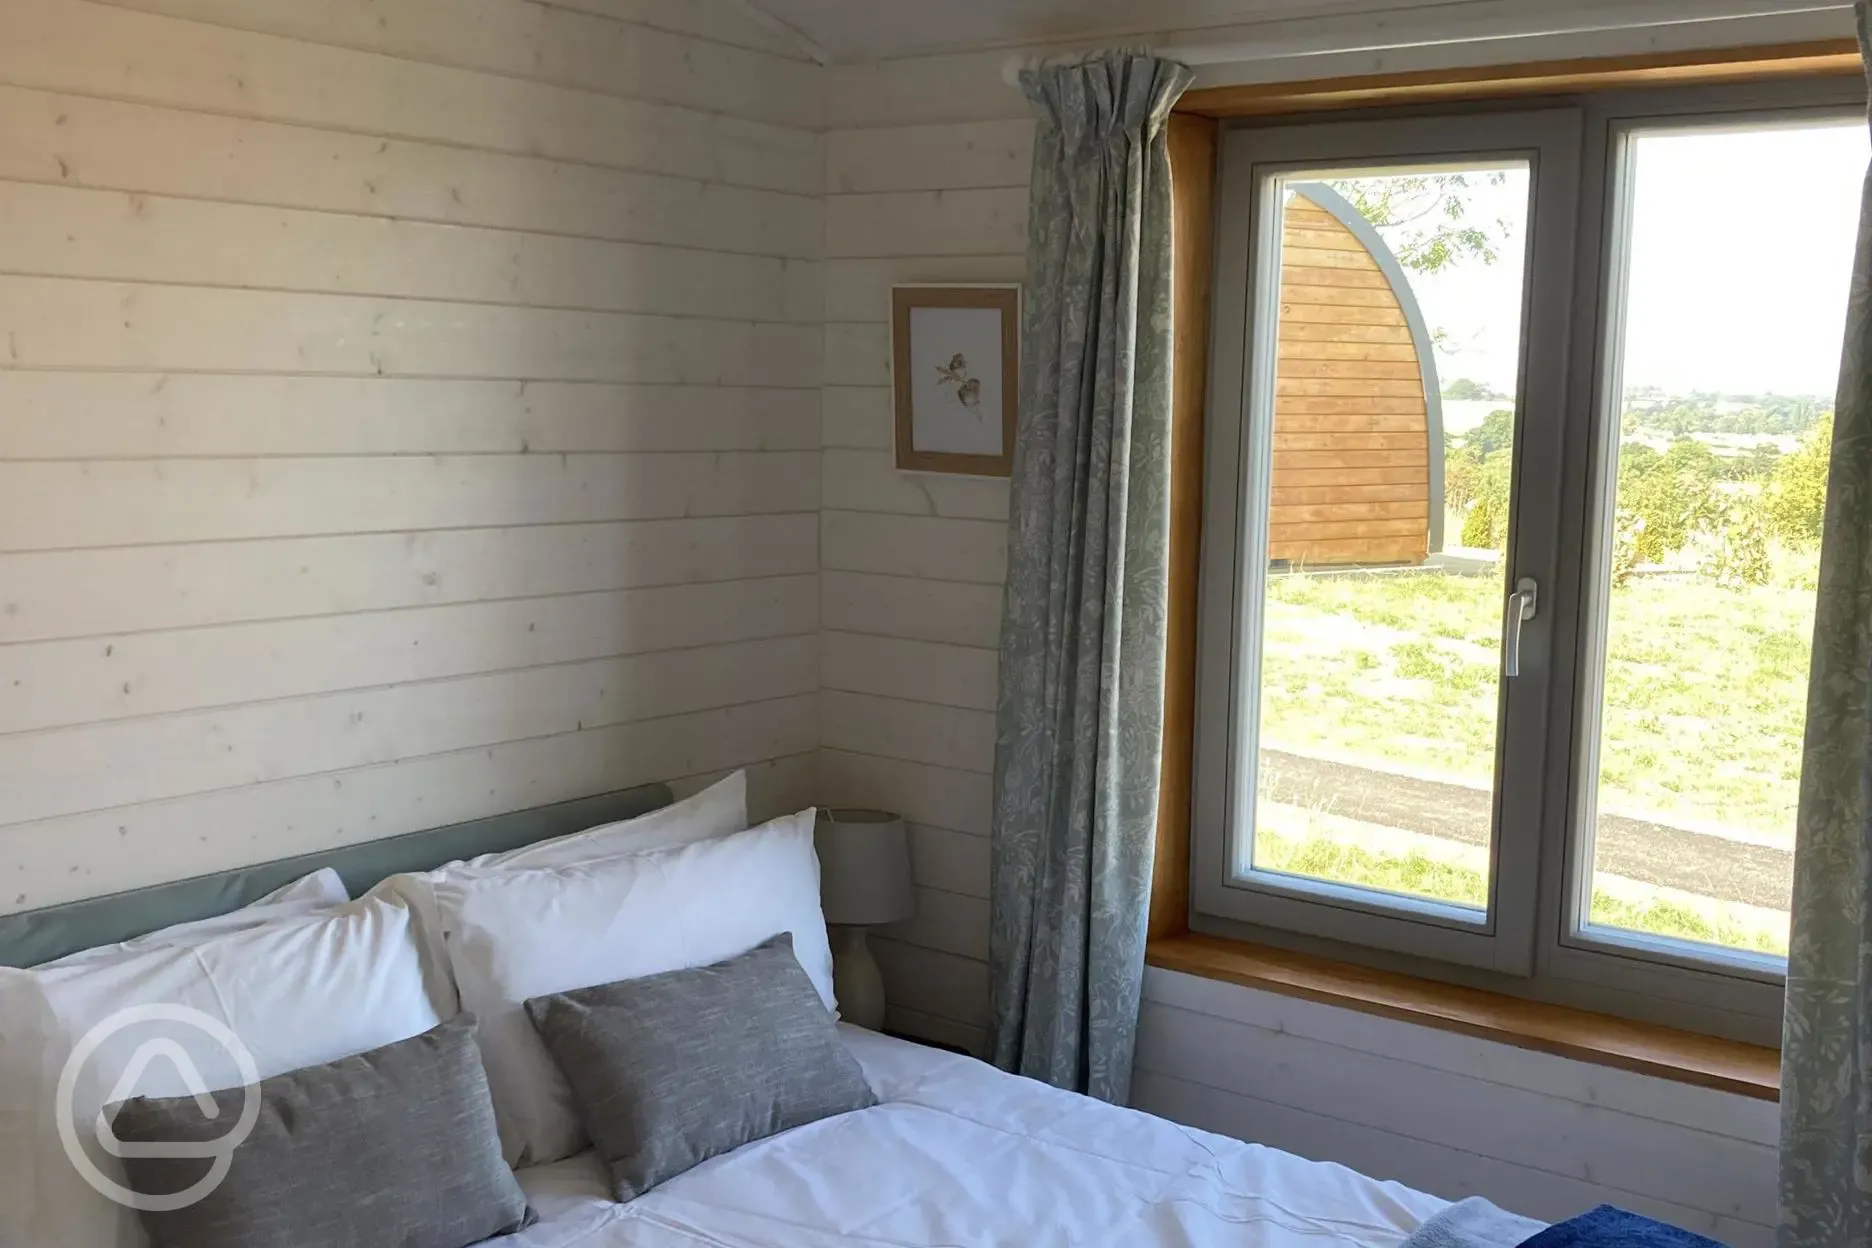 Stag Lodge Bedroom 2